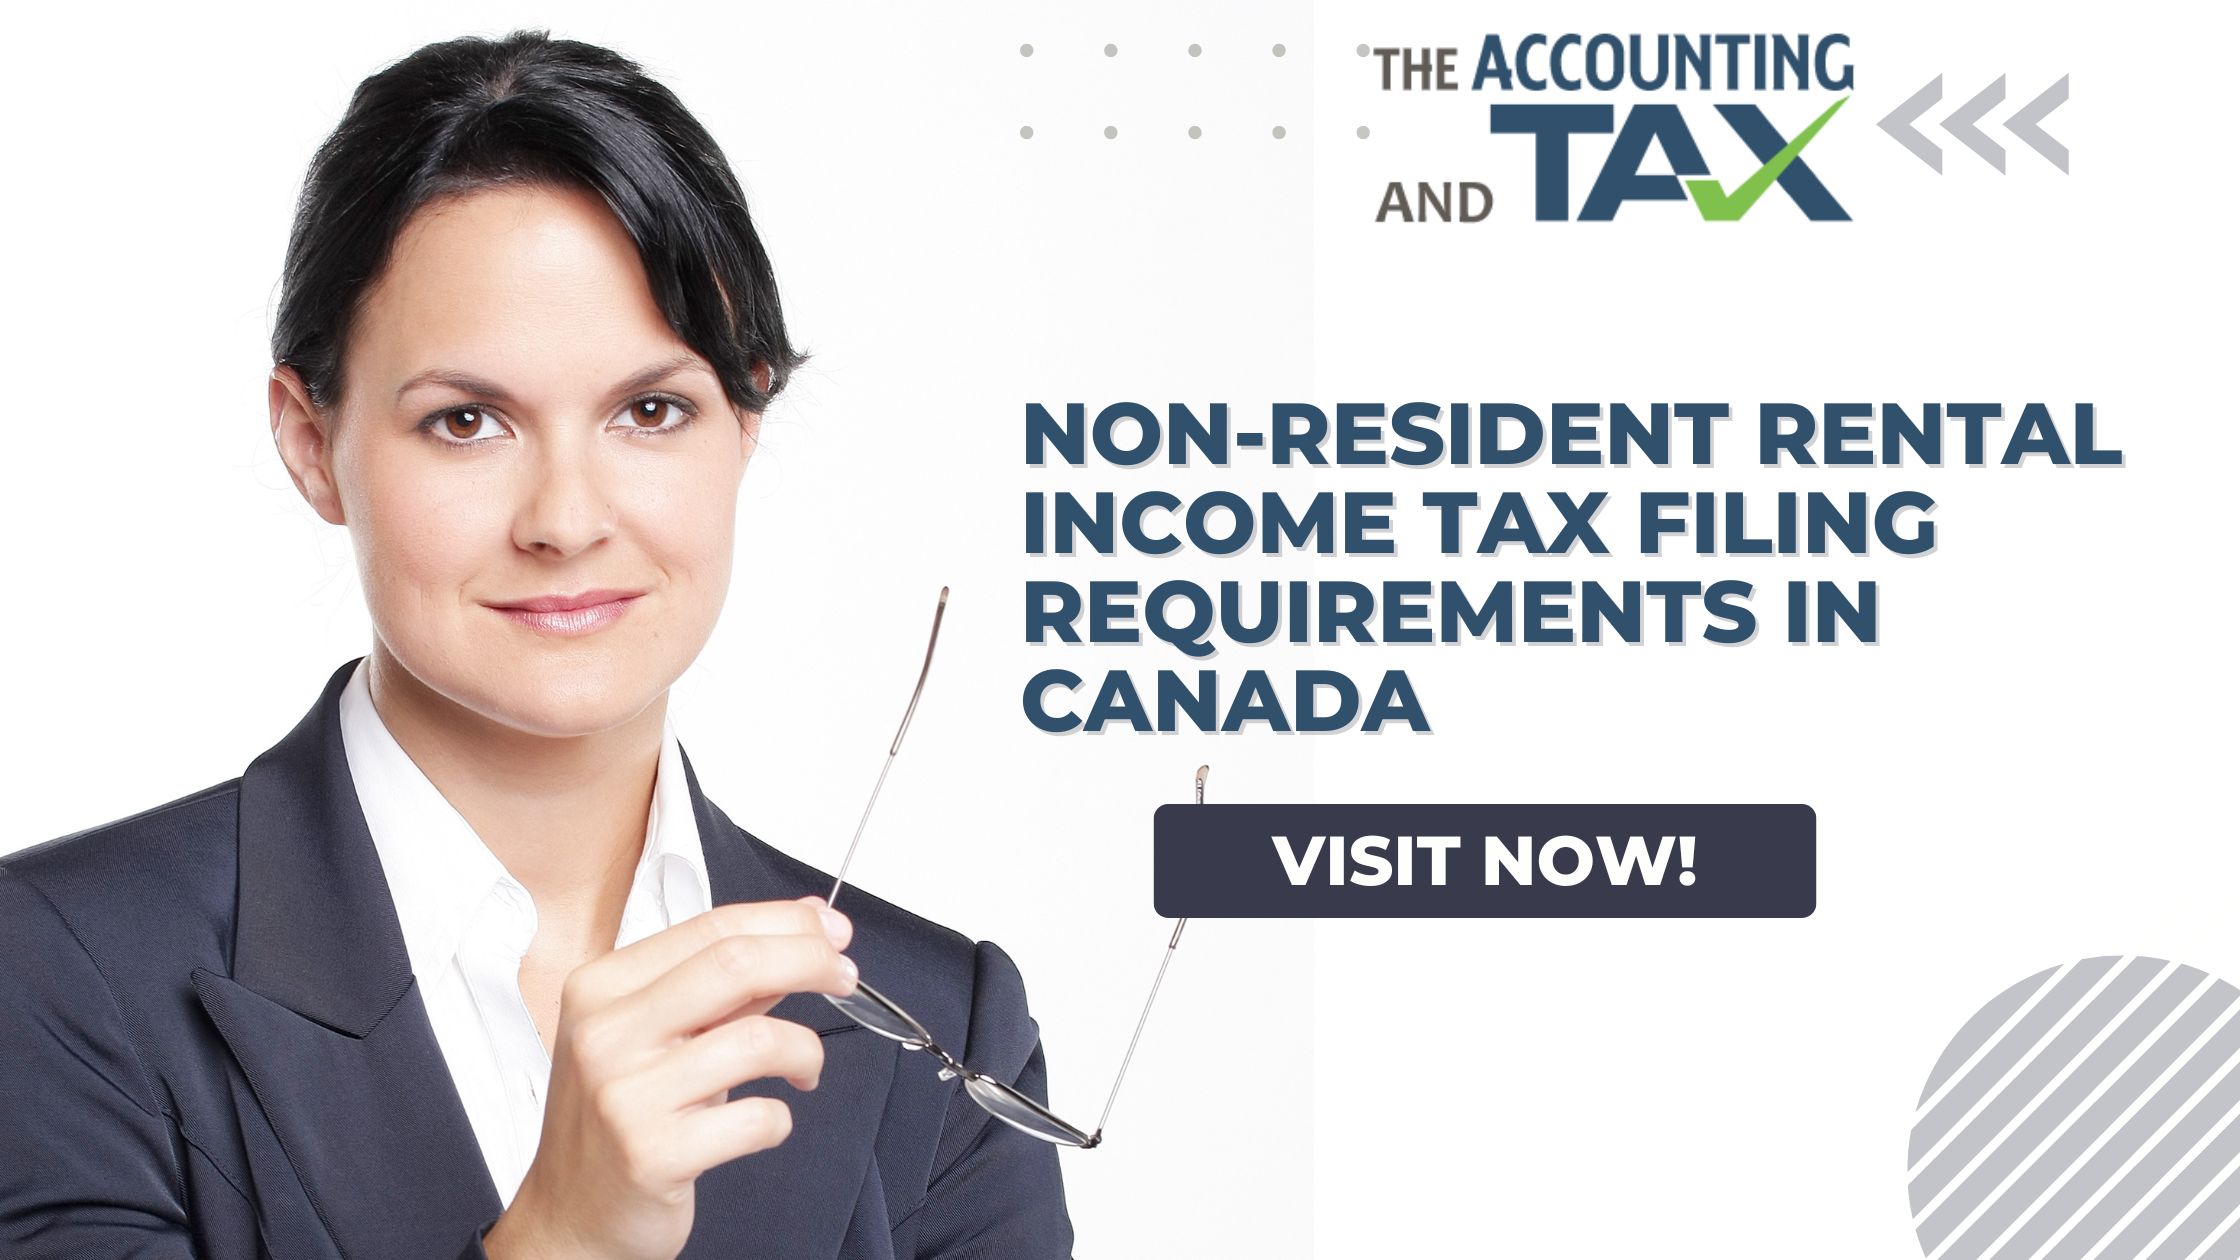 Non-resident rental income tax filing requirements in Canada